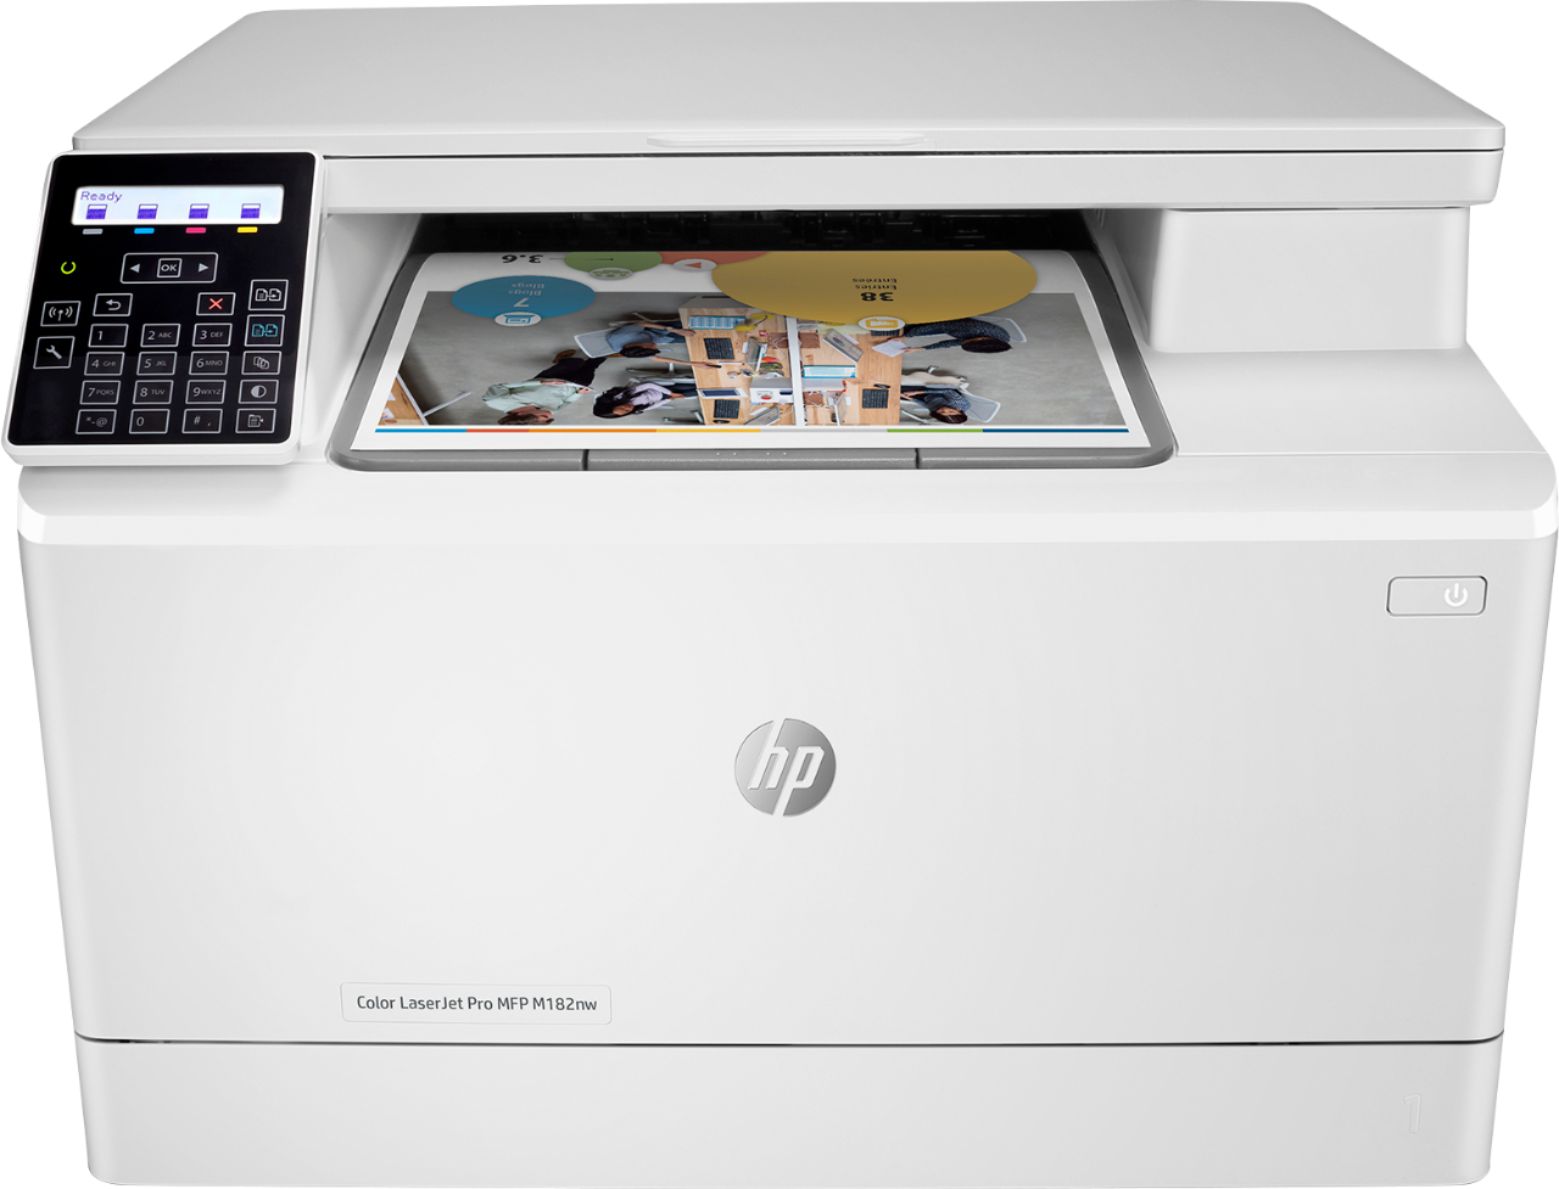 NEW - HP LaserJet Pro MFP M182nw Wireless Color All-In-One Laser ...